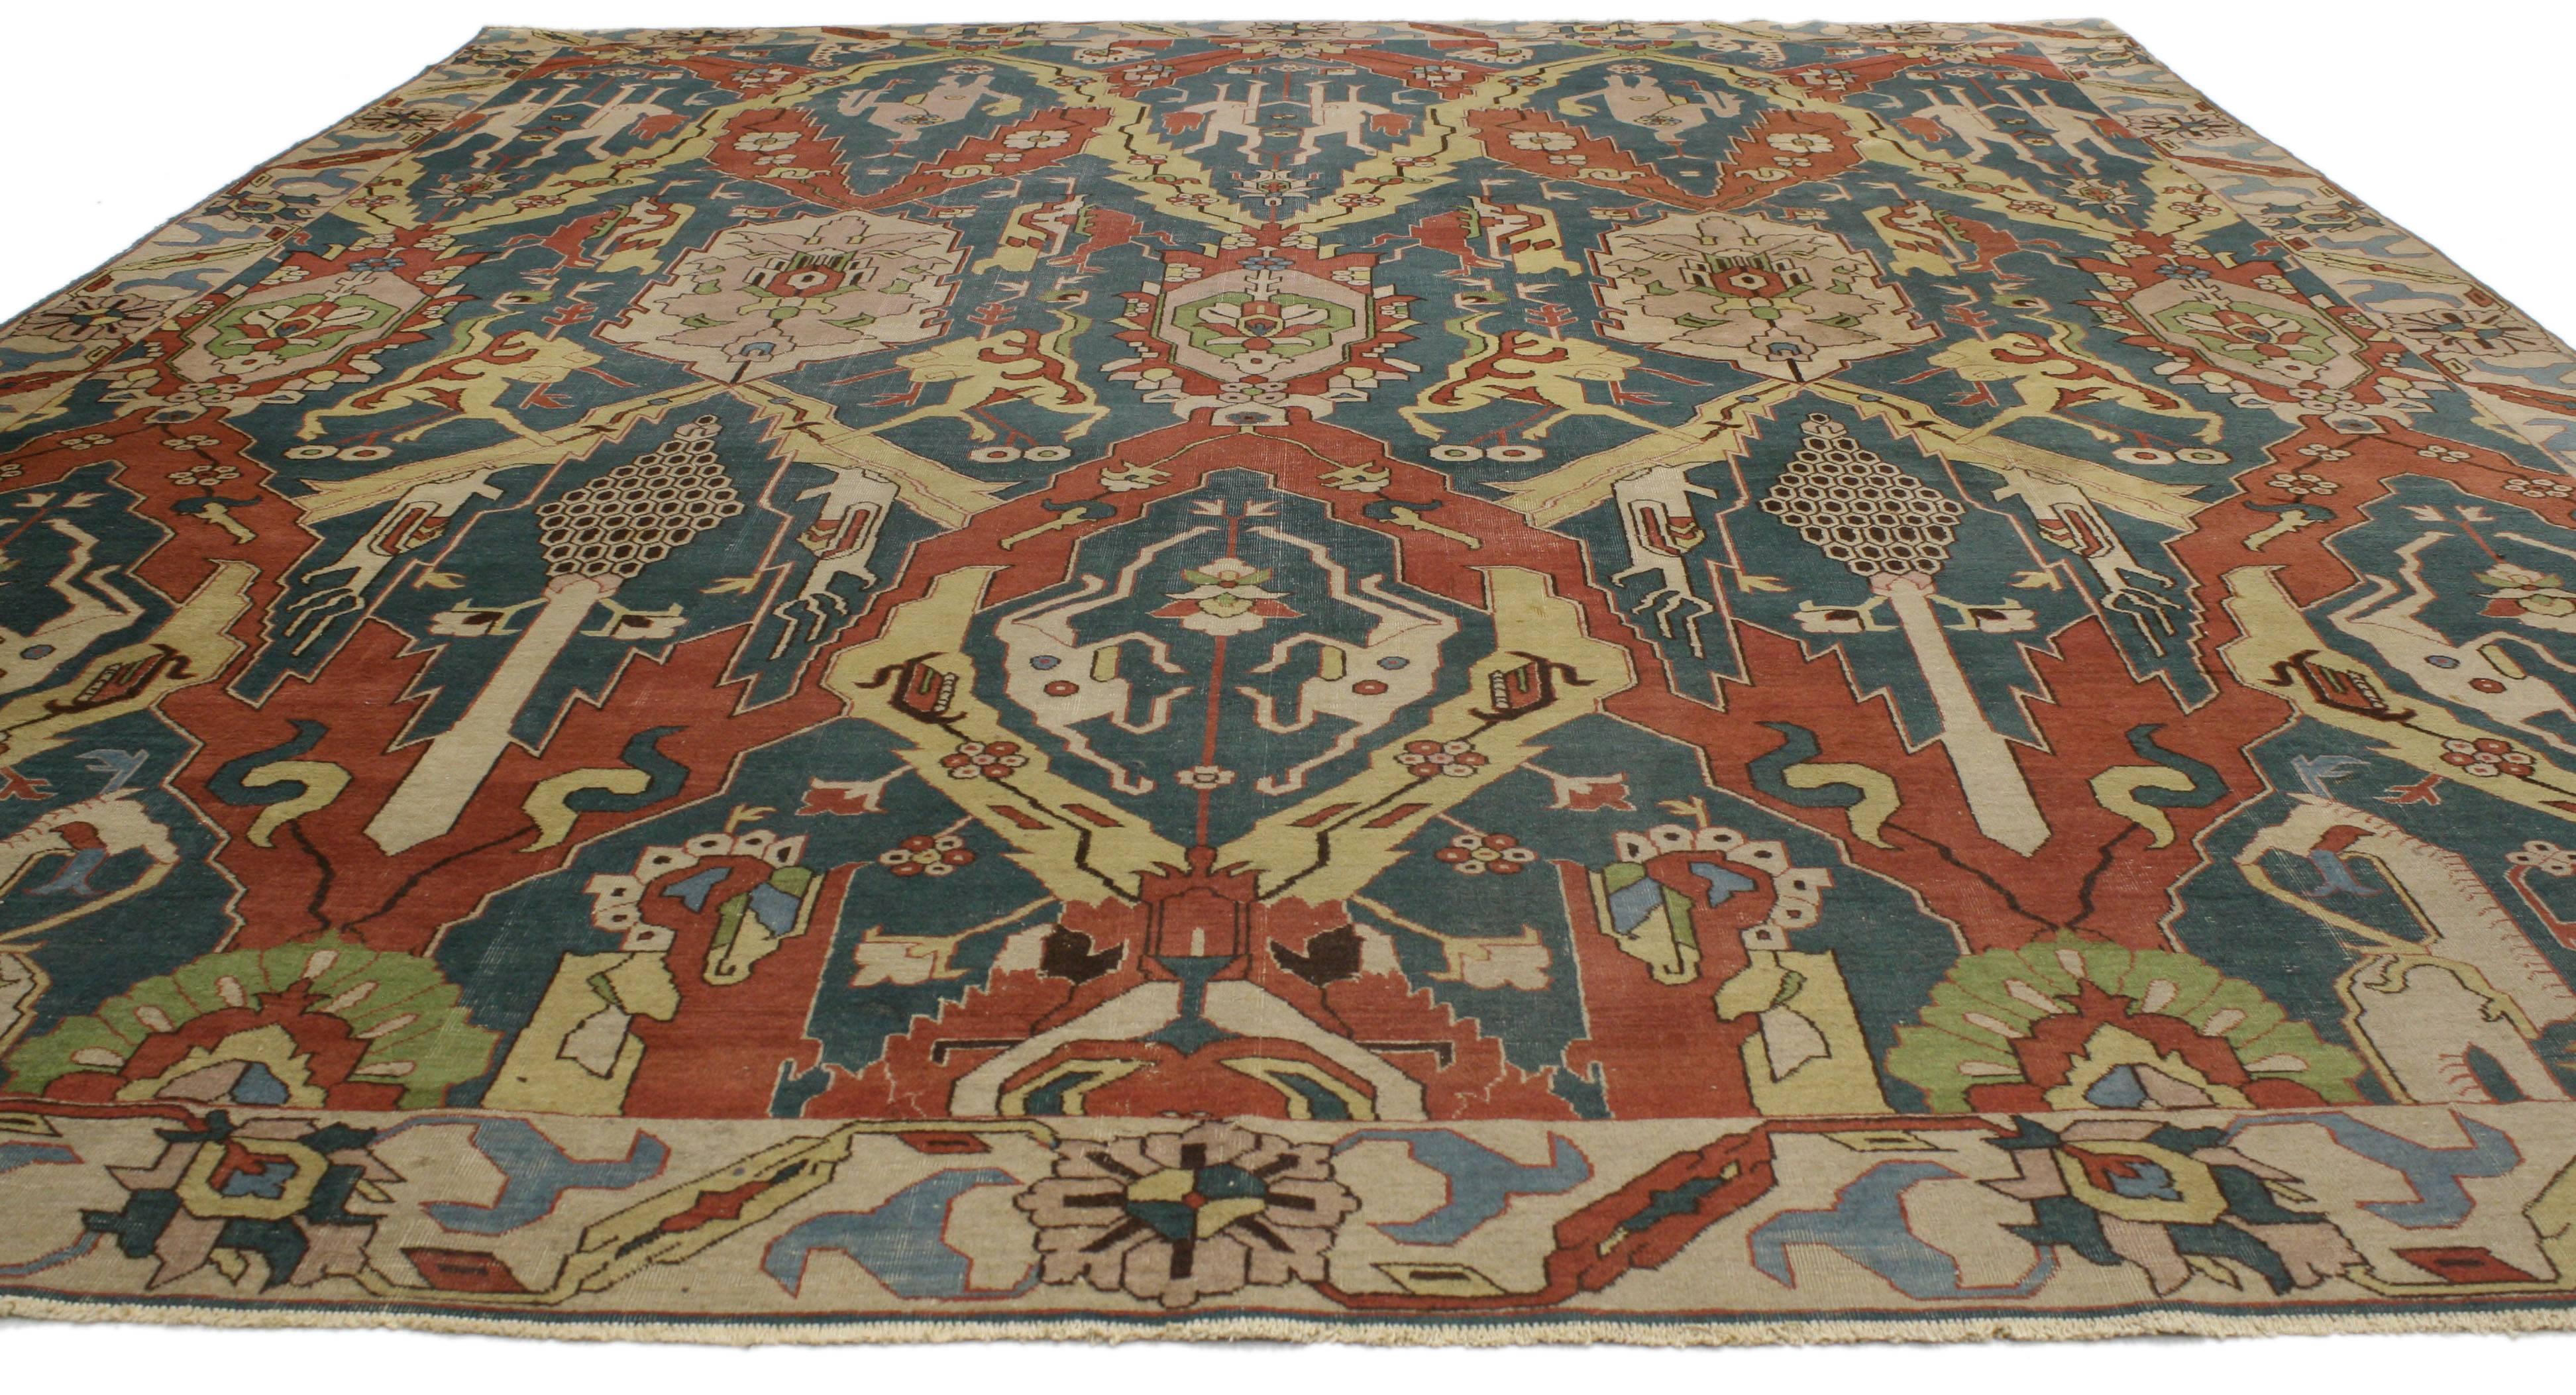 77049 antique Persian Tabriz rug with modern Art Deco style. Refined colors integrated with an intimate patina, this antique Persian Petag Tabriz rug showcases a modern Art Deco style. Classically composed and boasting an eclectic style, this